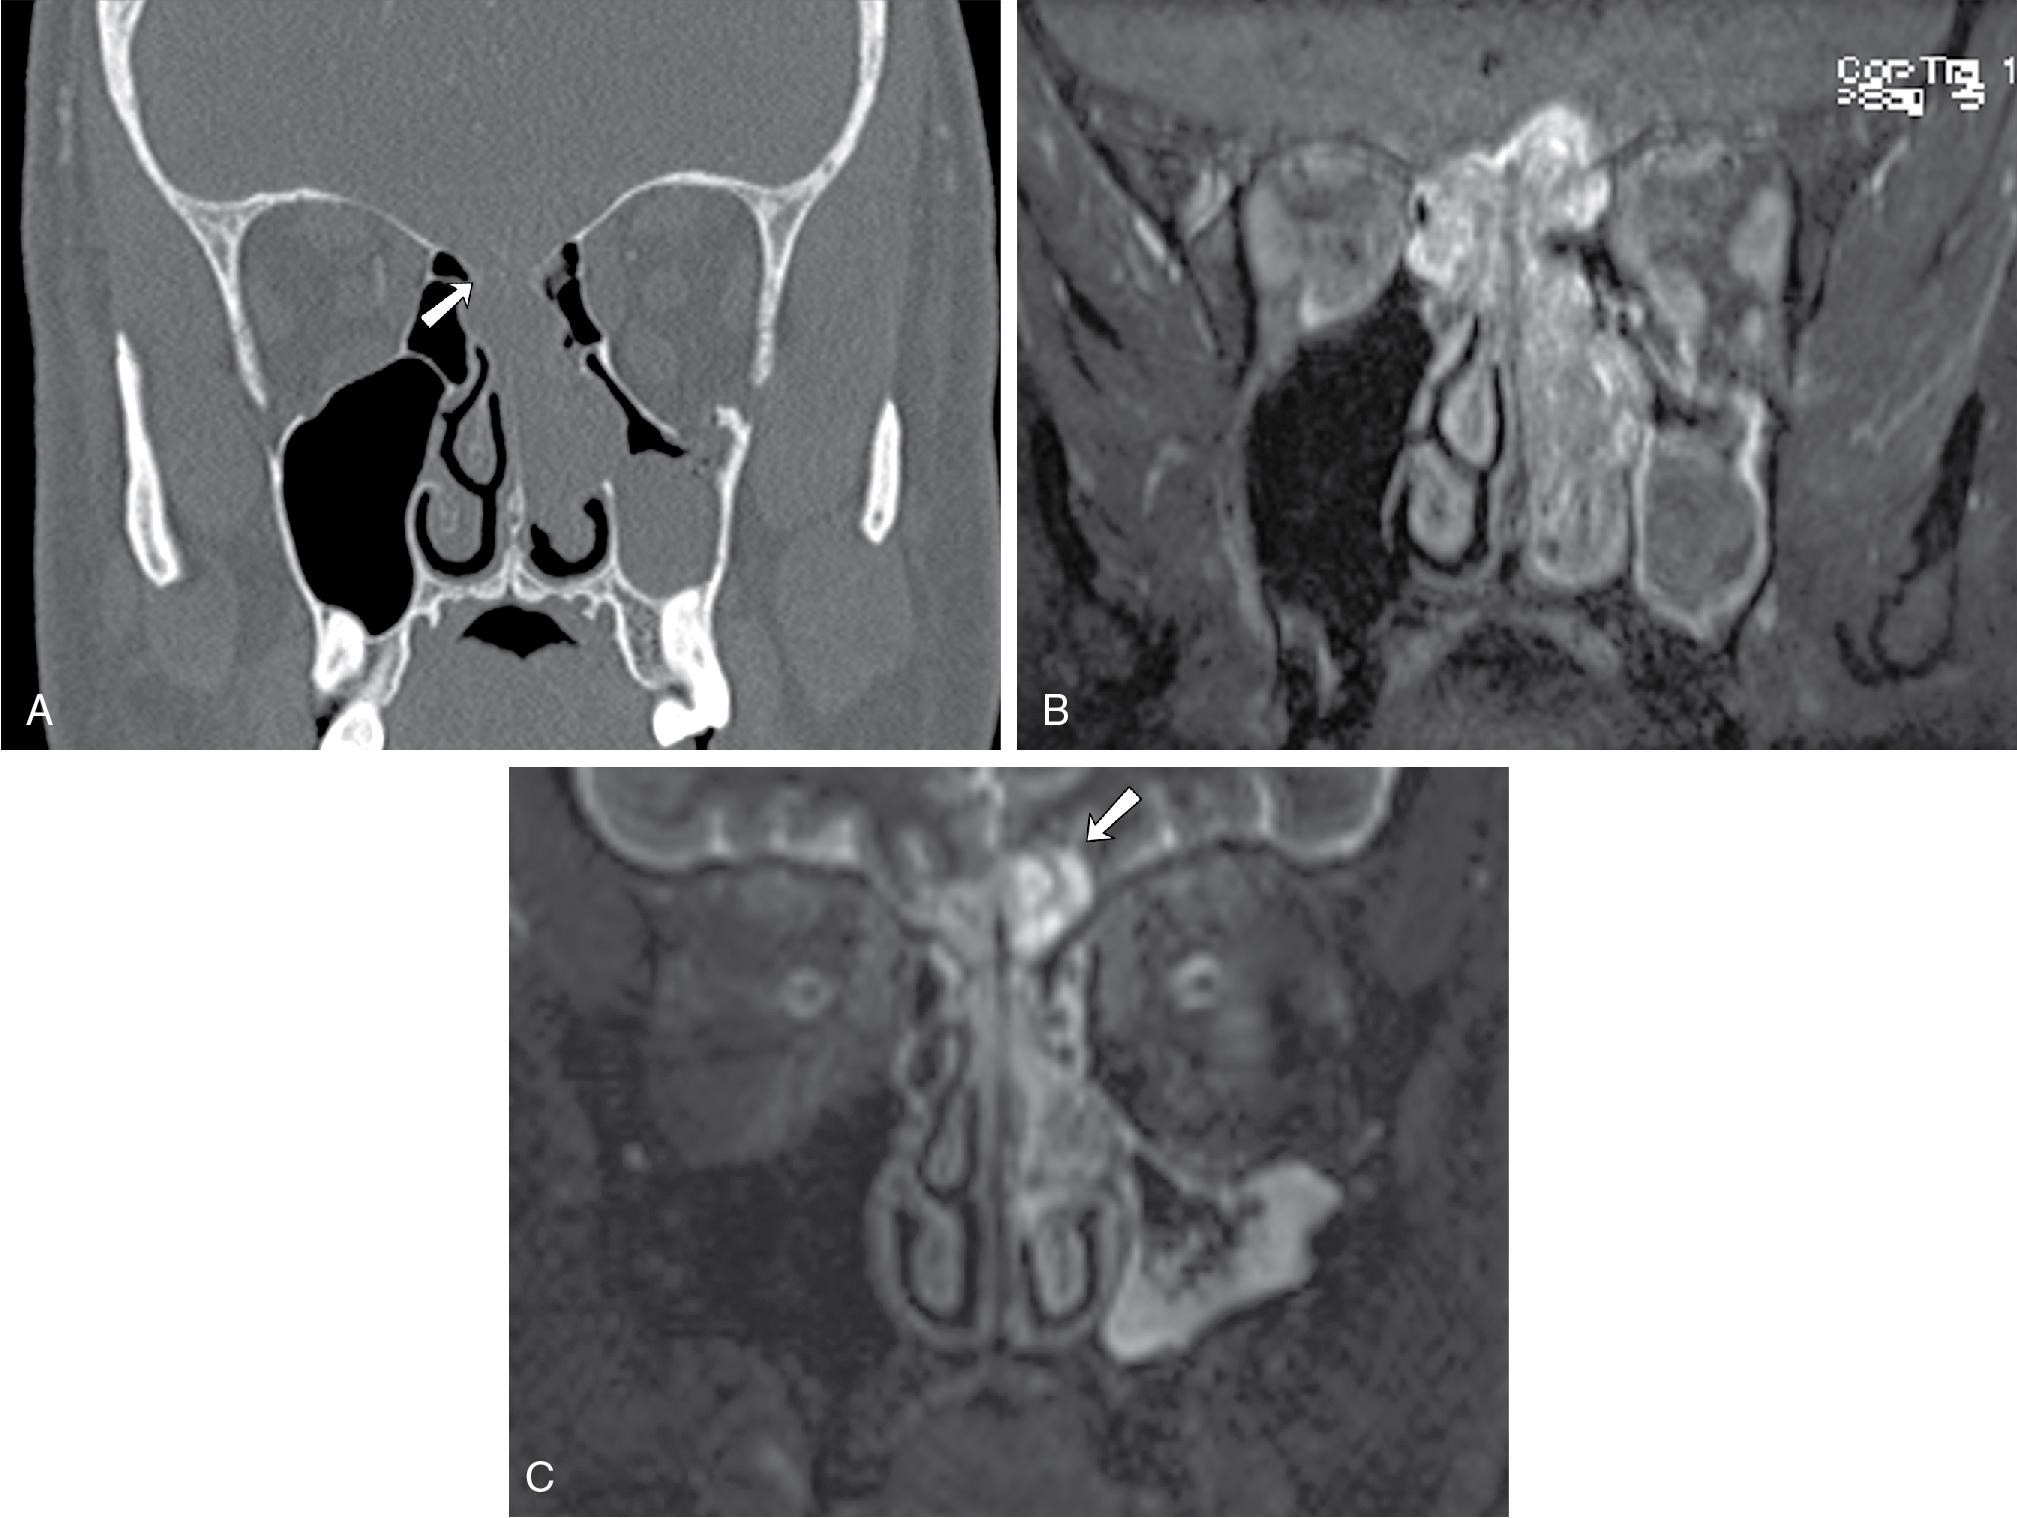 Fig. 27.2, Olfactory neuroblastoma. This 49-year-old man presented with left rhinorrhea and nasal obstruction. A, Coronal noncontrast computed tomography demonstrates opacification of the left nasal cavity with dehiscence at the anterior skull base (arrow) , with expansile soft tissue within the nasal cavity. B, Contrast-enhanced magnetic resonance imaging demonstrates the enhancing sinonasal mass with bulky tumor in left nasal cavity and additional tumor burden in the right superior nasal cavity that extends into the anterior skull base. C, Coronal T2-weighted image shows marginal tumor cysts (arrow) typical of olfactory neuroblastoma.